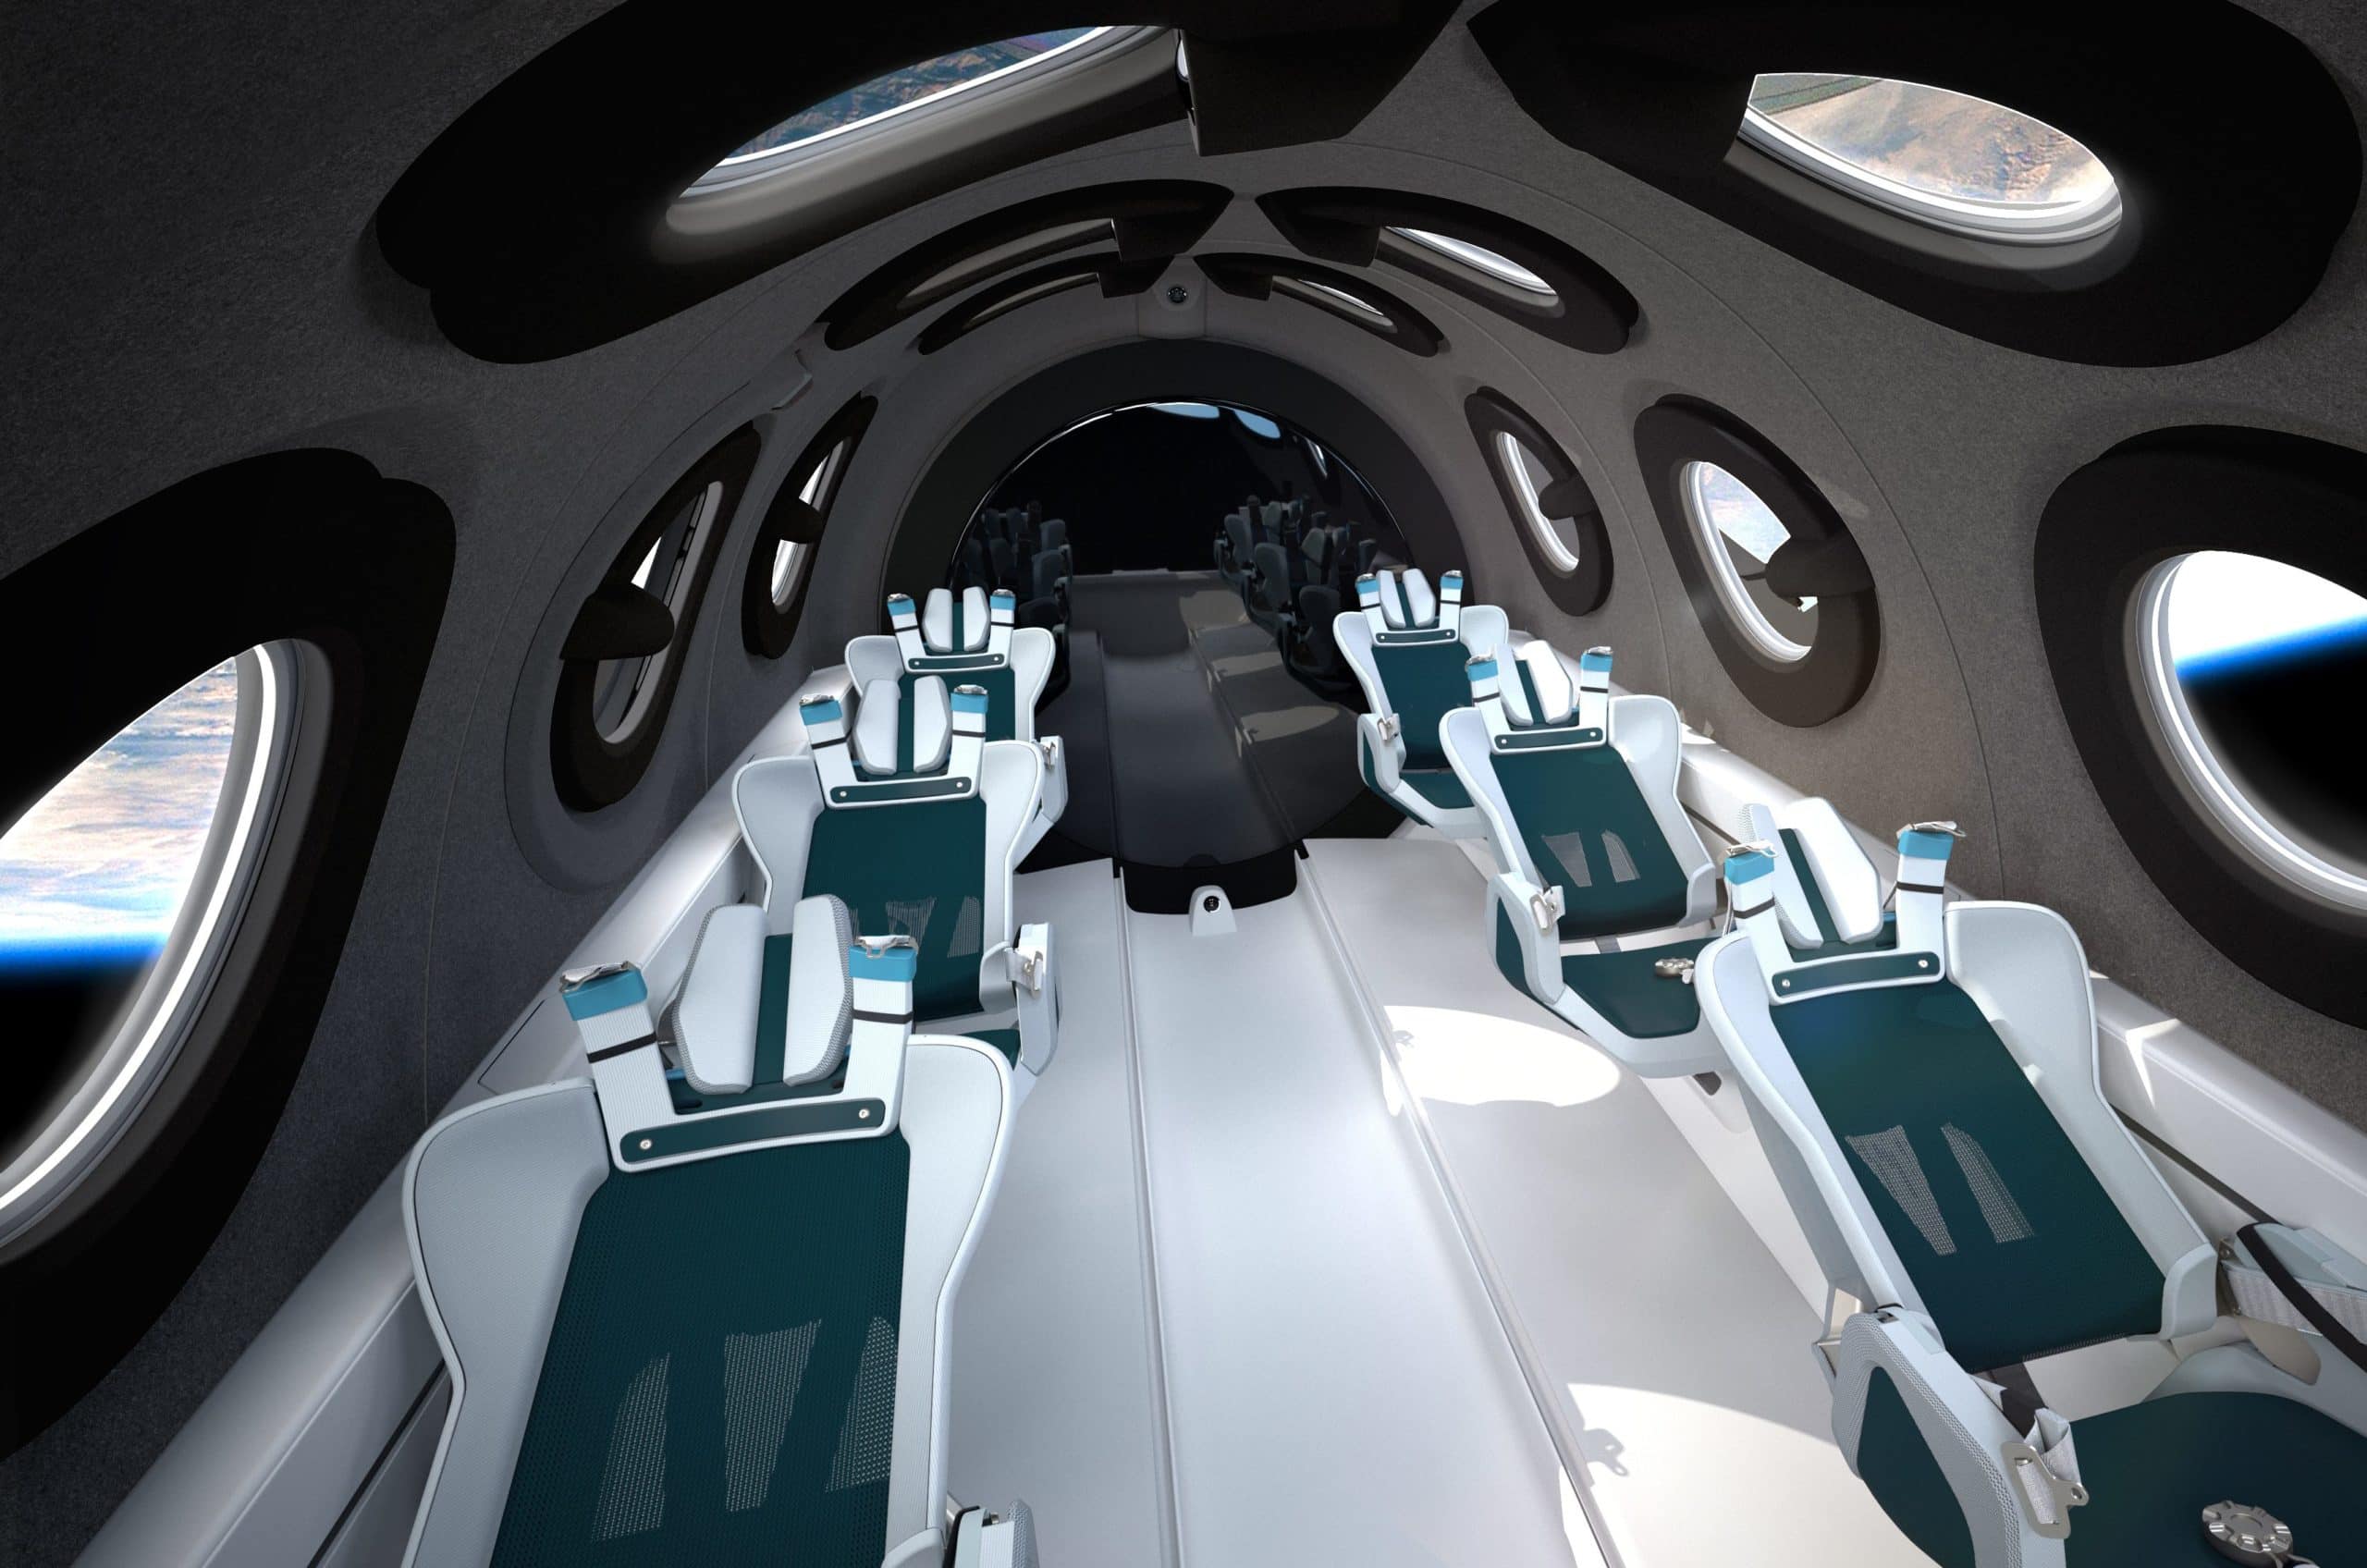 Virgin Galactic Reveals SpaceShipTwo Cabin, With Ceiling Windows, Built-In  Cameras and Seatback Displays - APEX